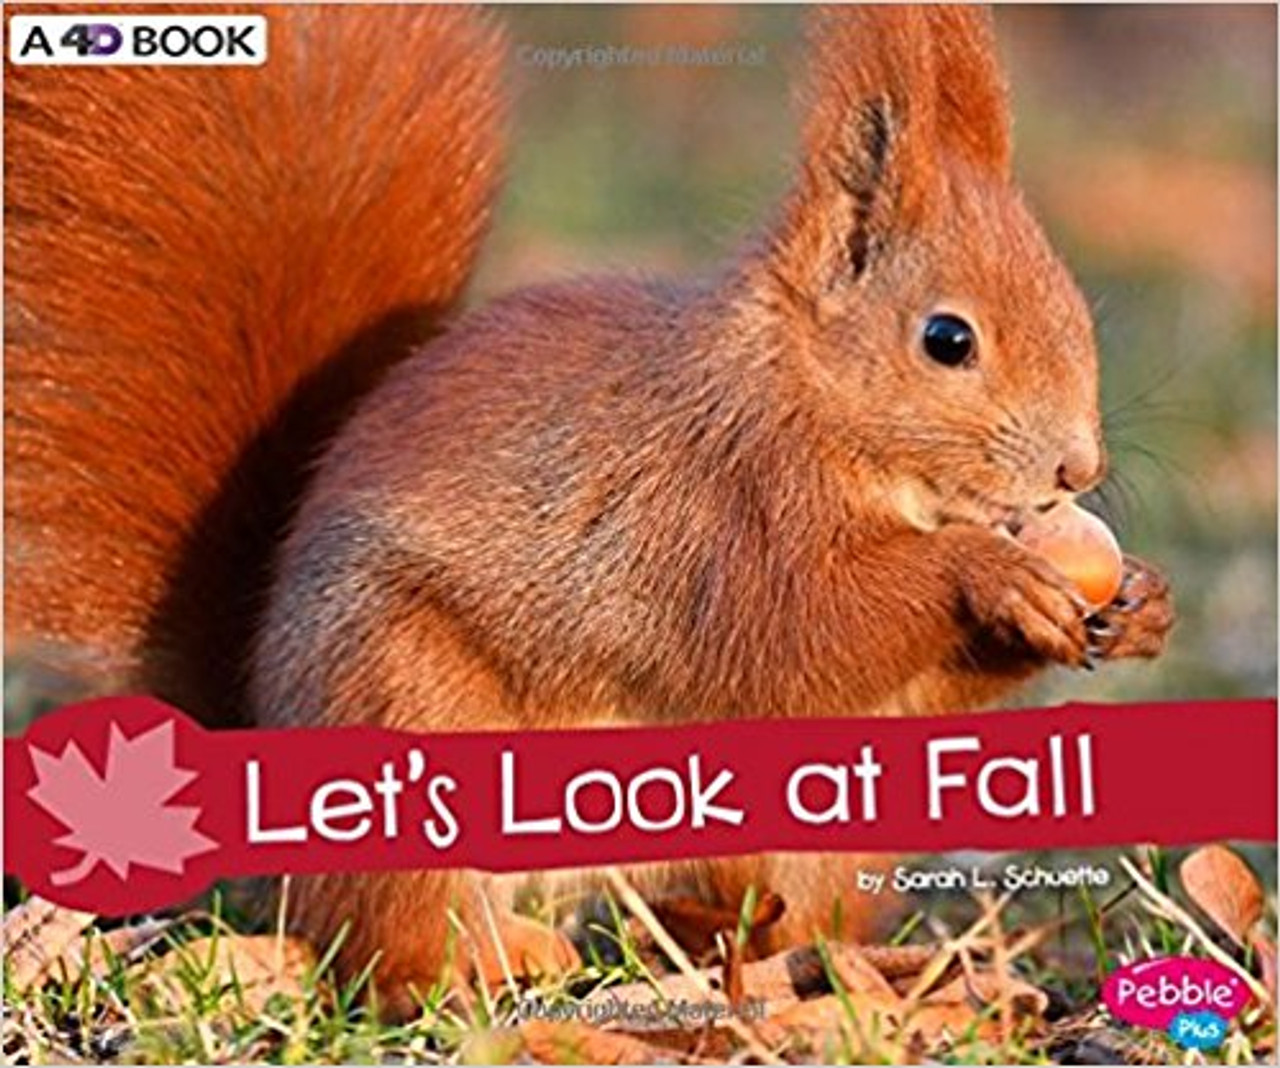 Let's Look at Fall: A 4D Book by Sarah L Schuette